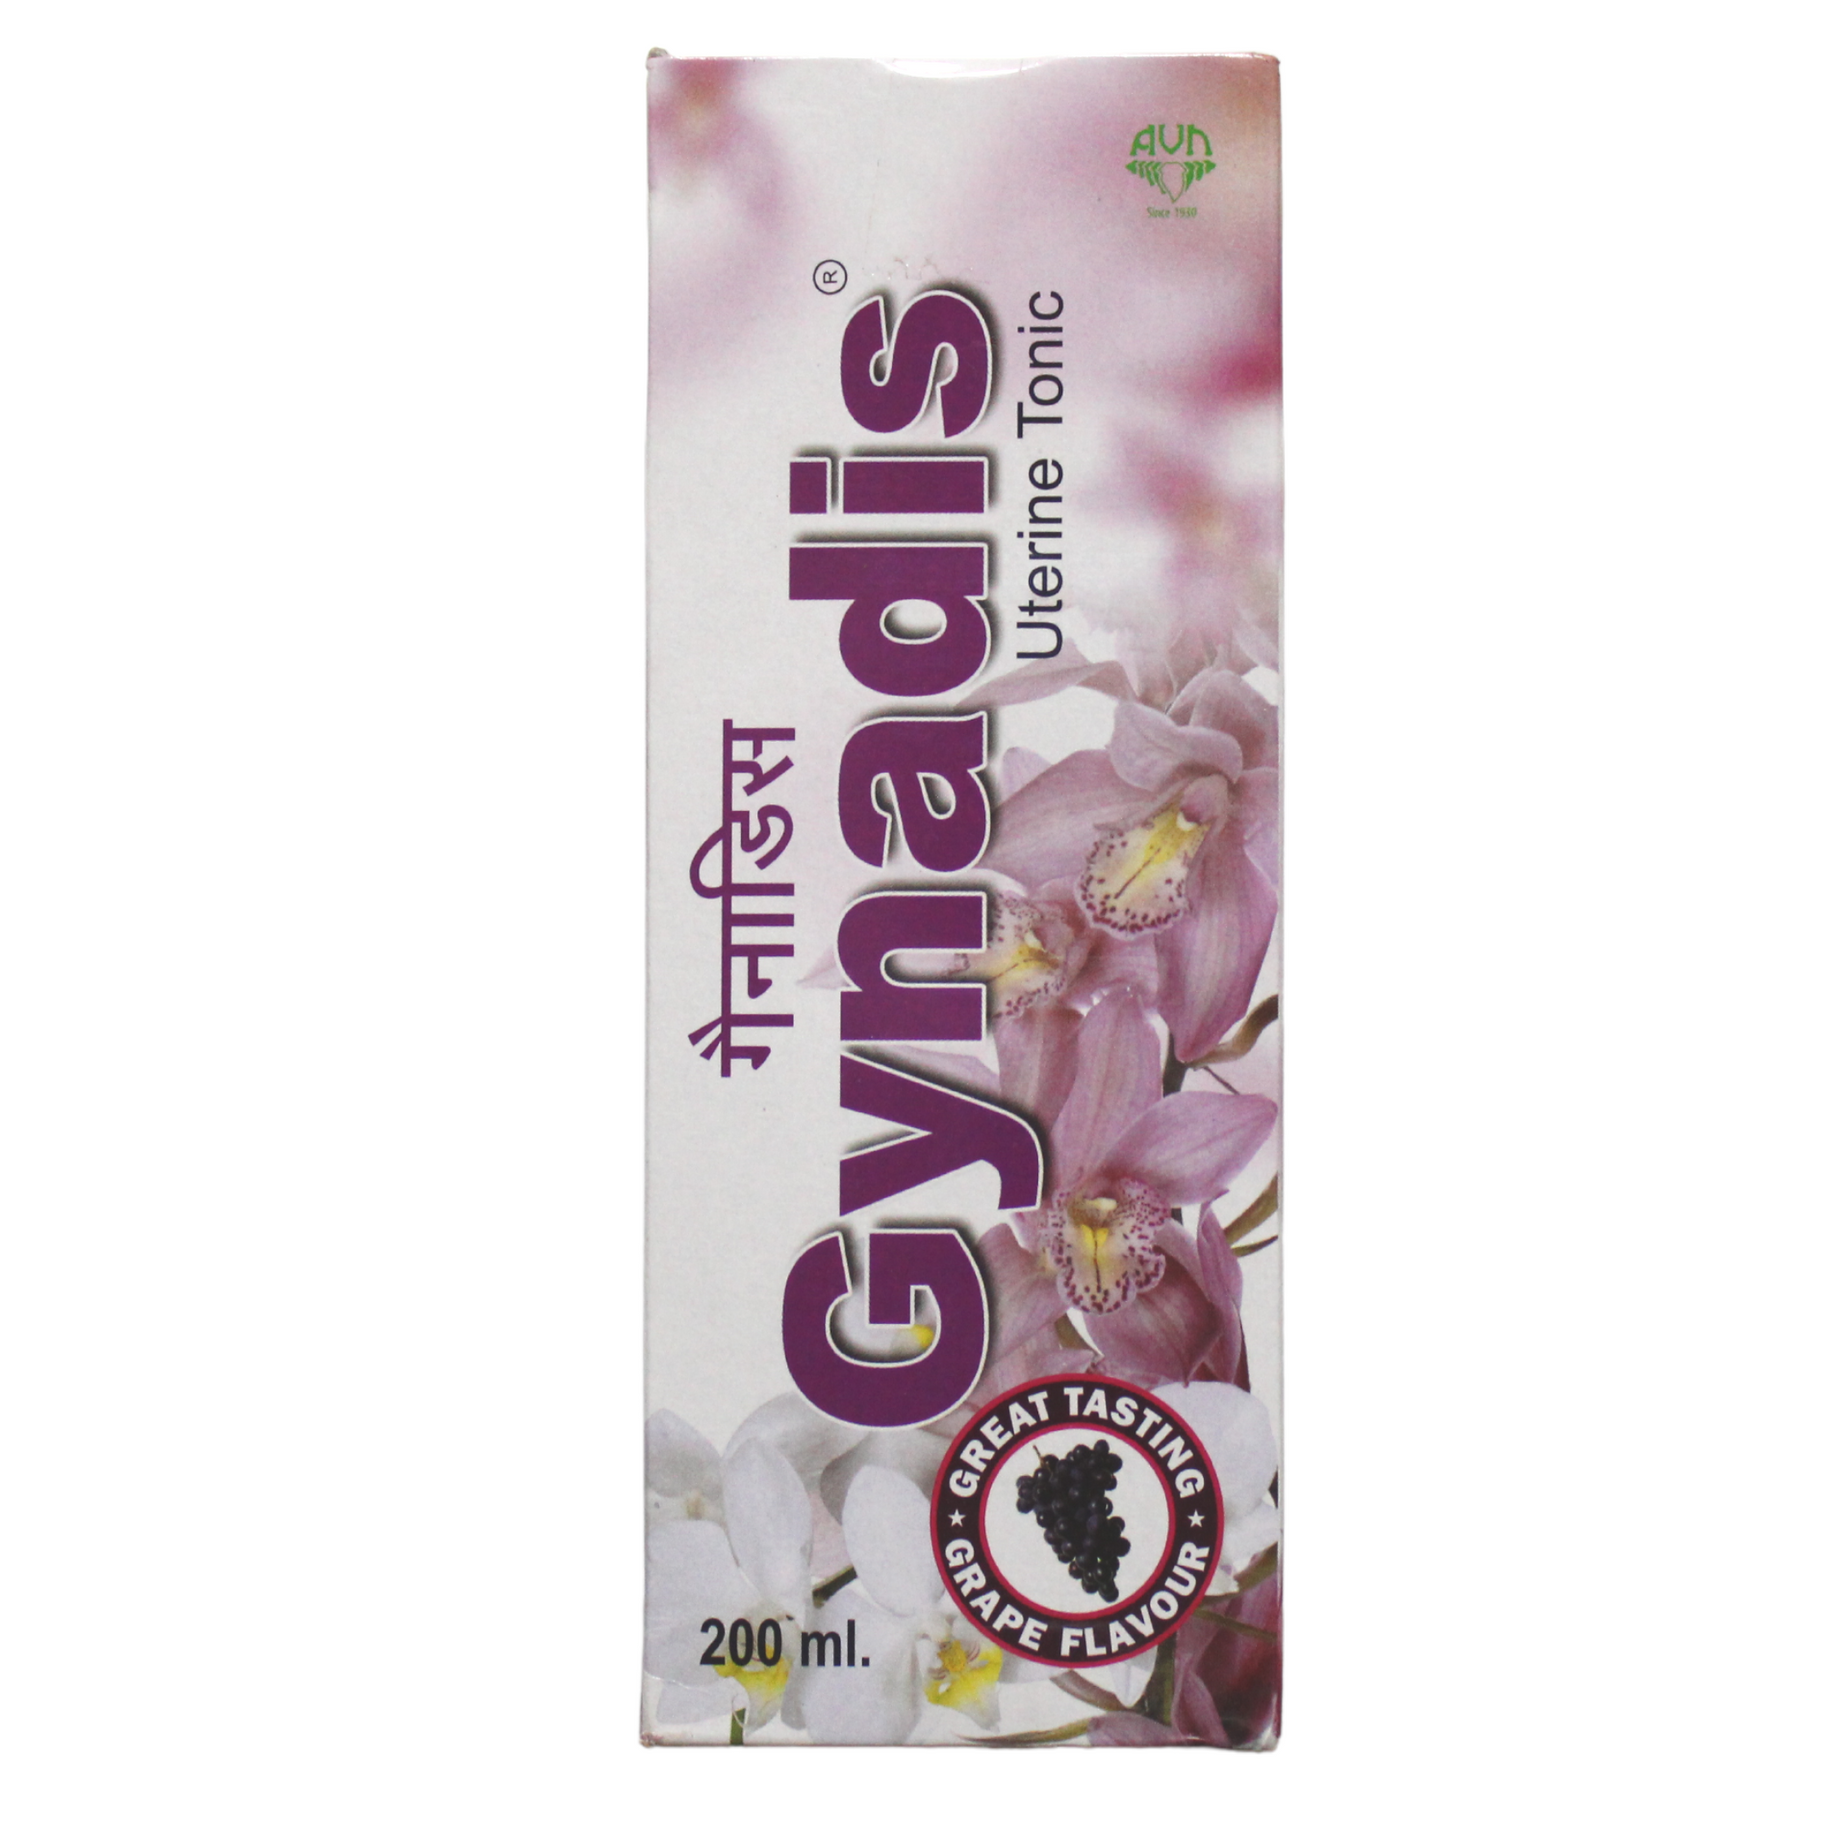 Shop AVN Gynadis Syrup 200ml at price 135.00 from AVN Online - Ayush Care